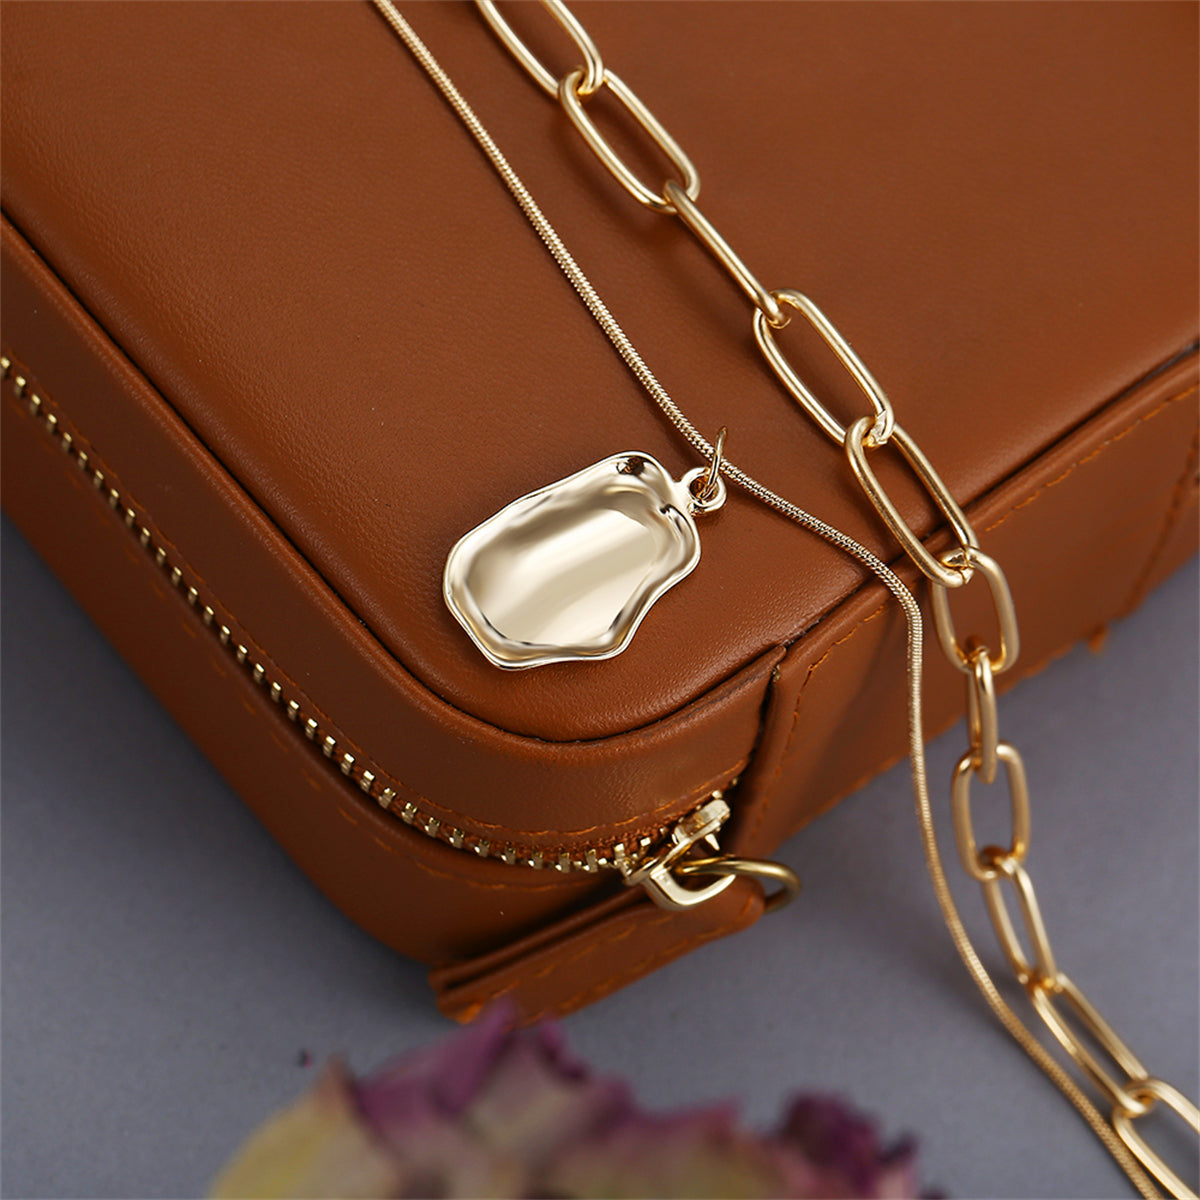 18K Gold-Plated Cable Chain Layered Pendant Necklace